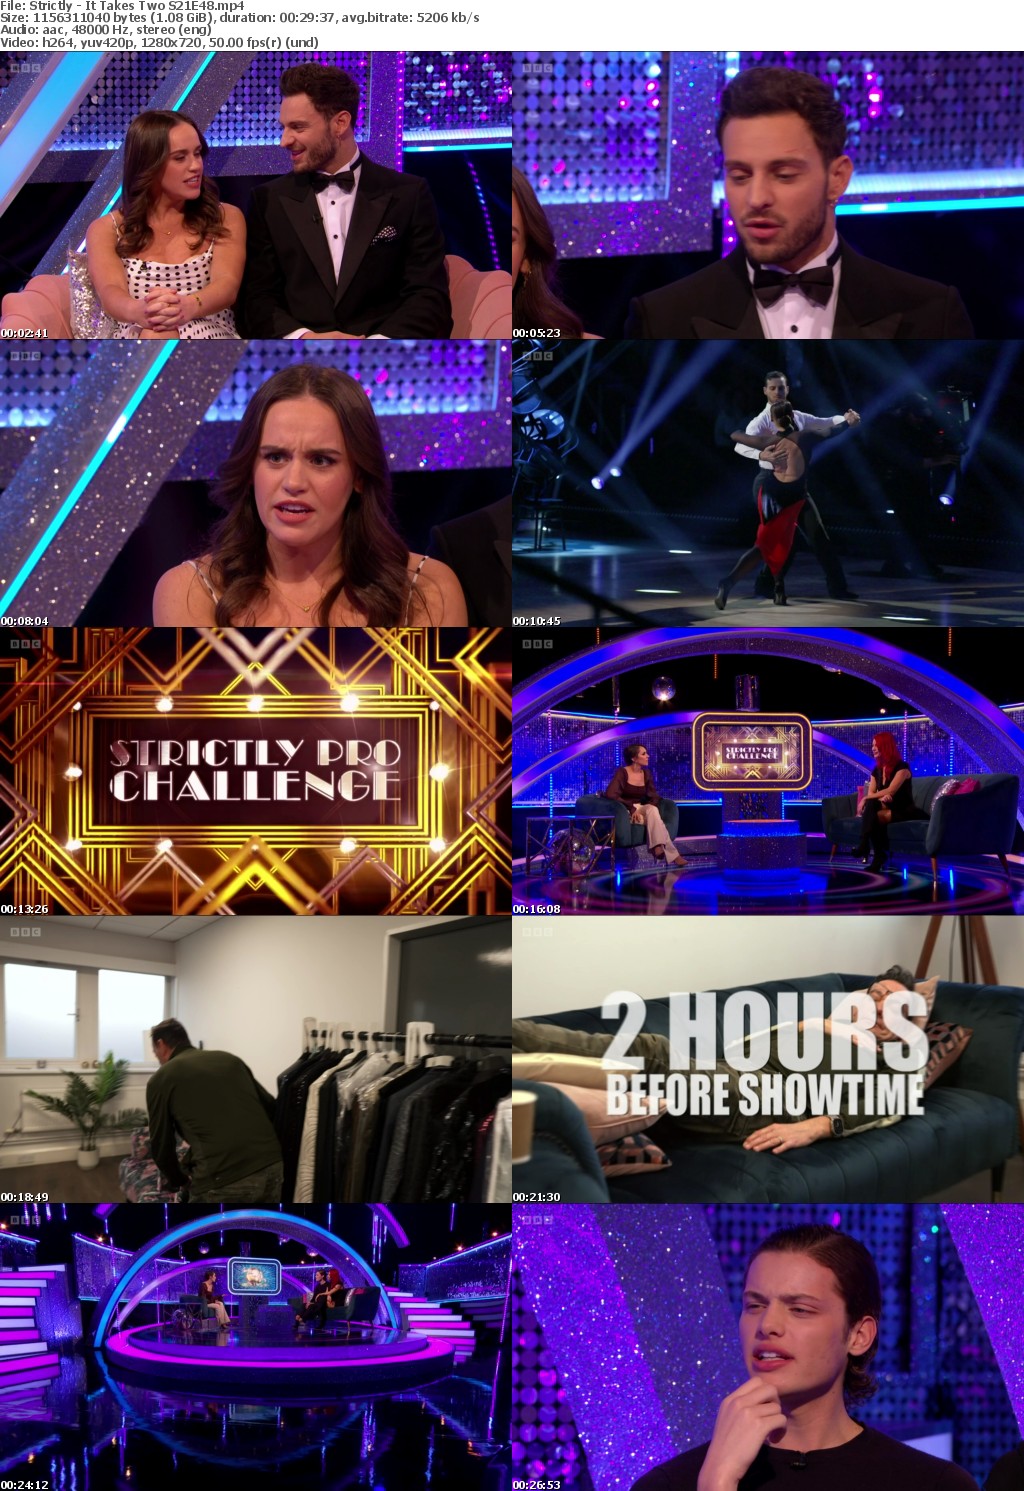 Strictly - It Takes Two S21E48 (1280x720p HD, 50fps, soft Eng subs)